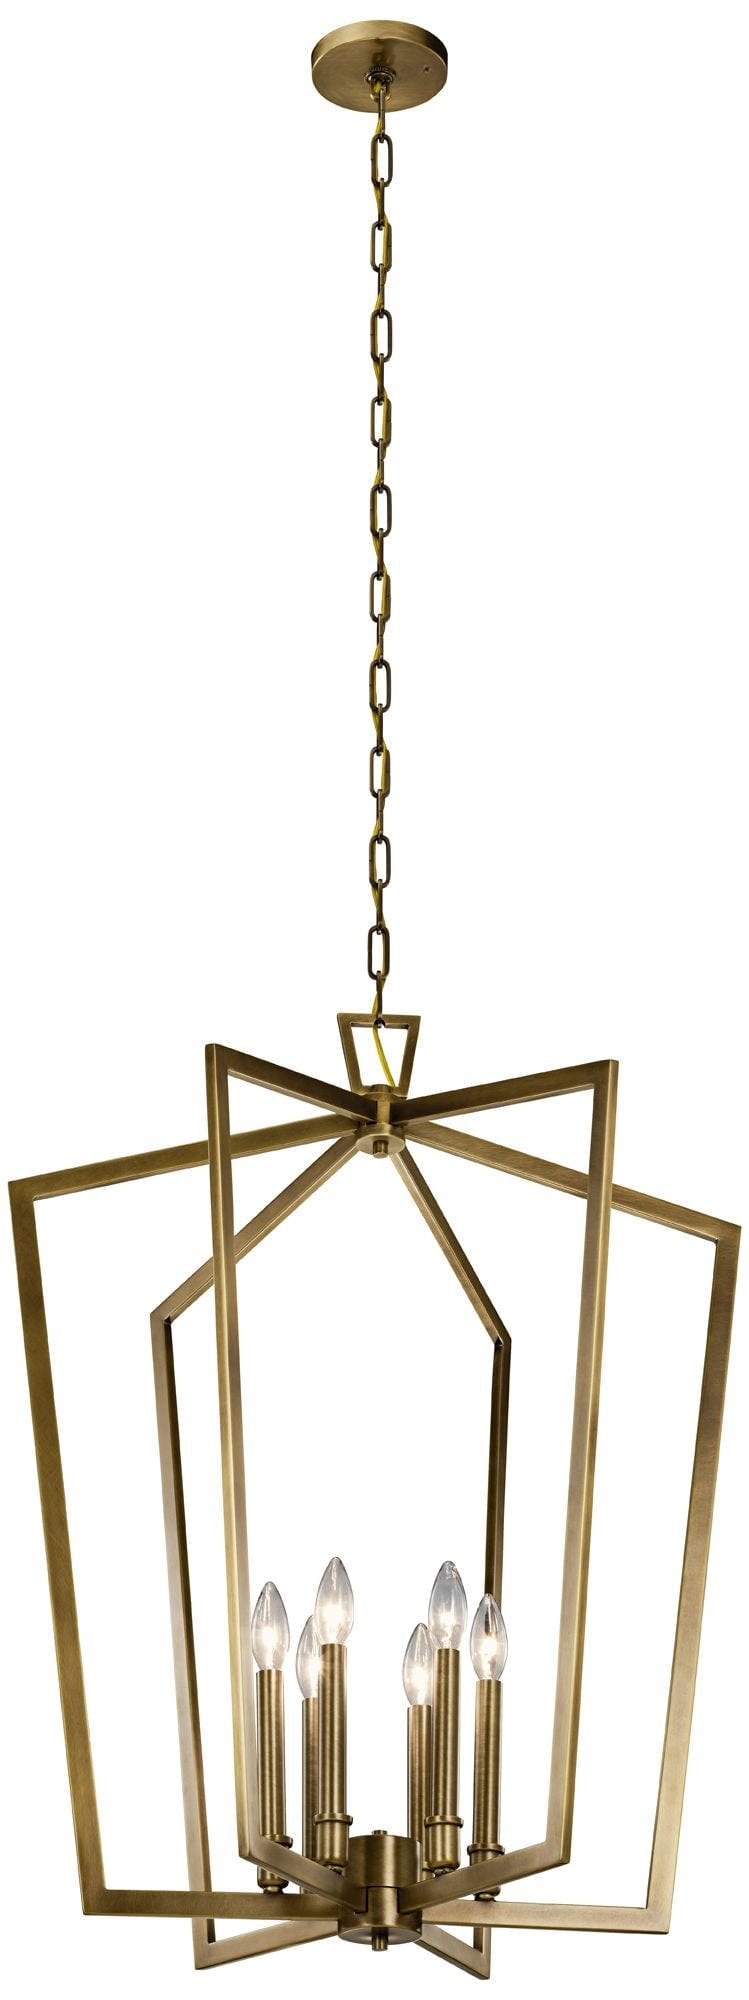 Abbotswell 24.75" Polished Nickel Modern Cage Pendant Light